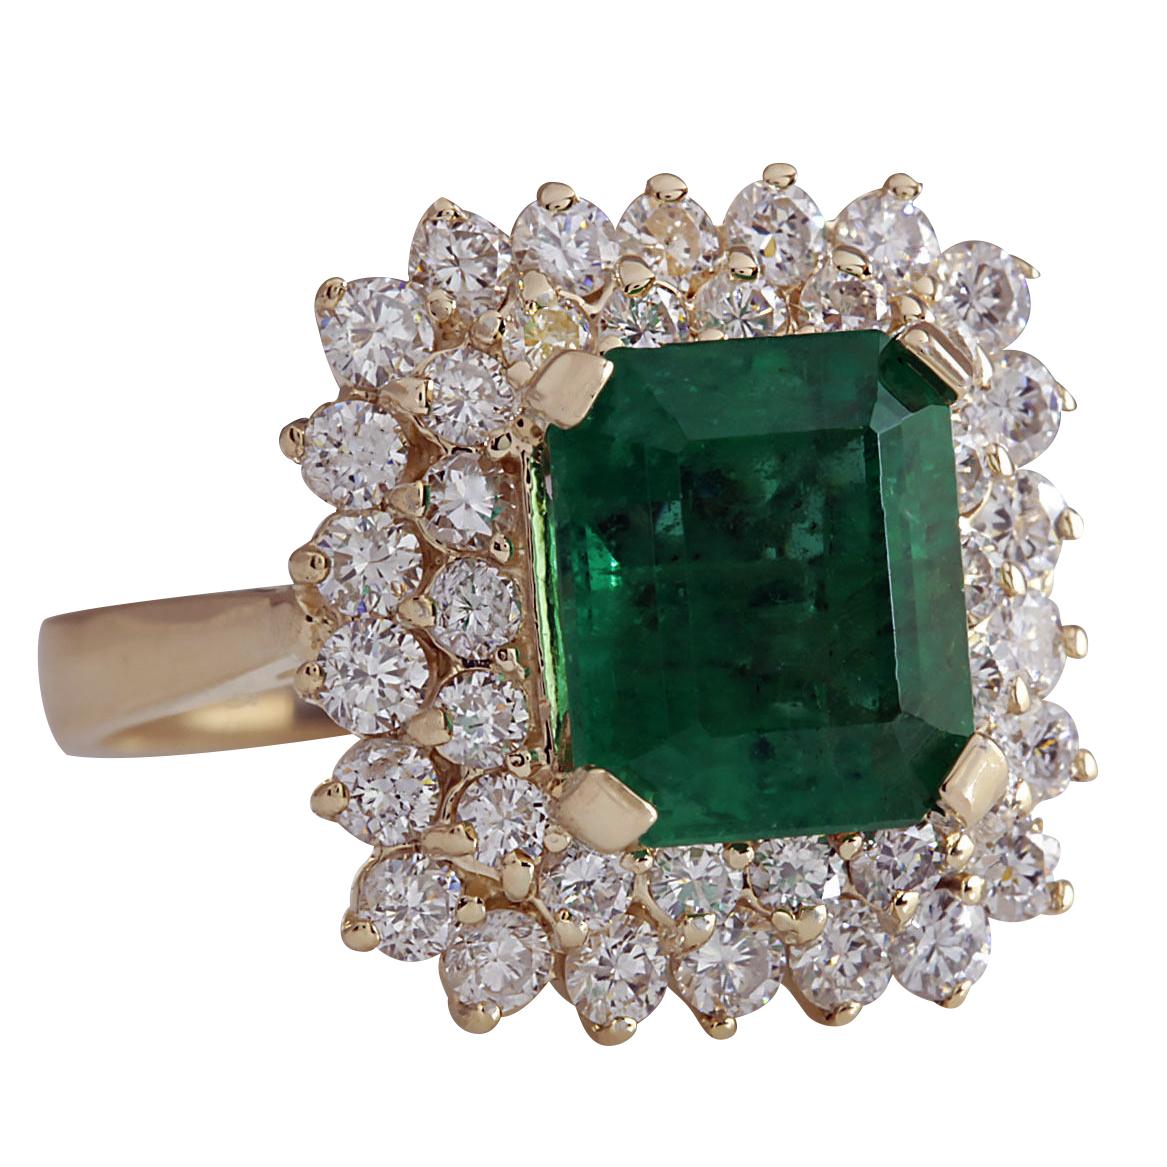 Stamped: 14K Yellow Gold
Total Ring Weight: 6.5 Grams
Total Natural Emerald Weight is 4.06 Carat (Measures: 10.00x8.00 mm)
Color: Green
Total Natural Diamond Weight is 1.45 Carat
Color: F-G, Clarity: VS2-SI1
Face Measures: 17.11x16.32 mm
Sku: